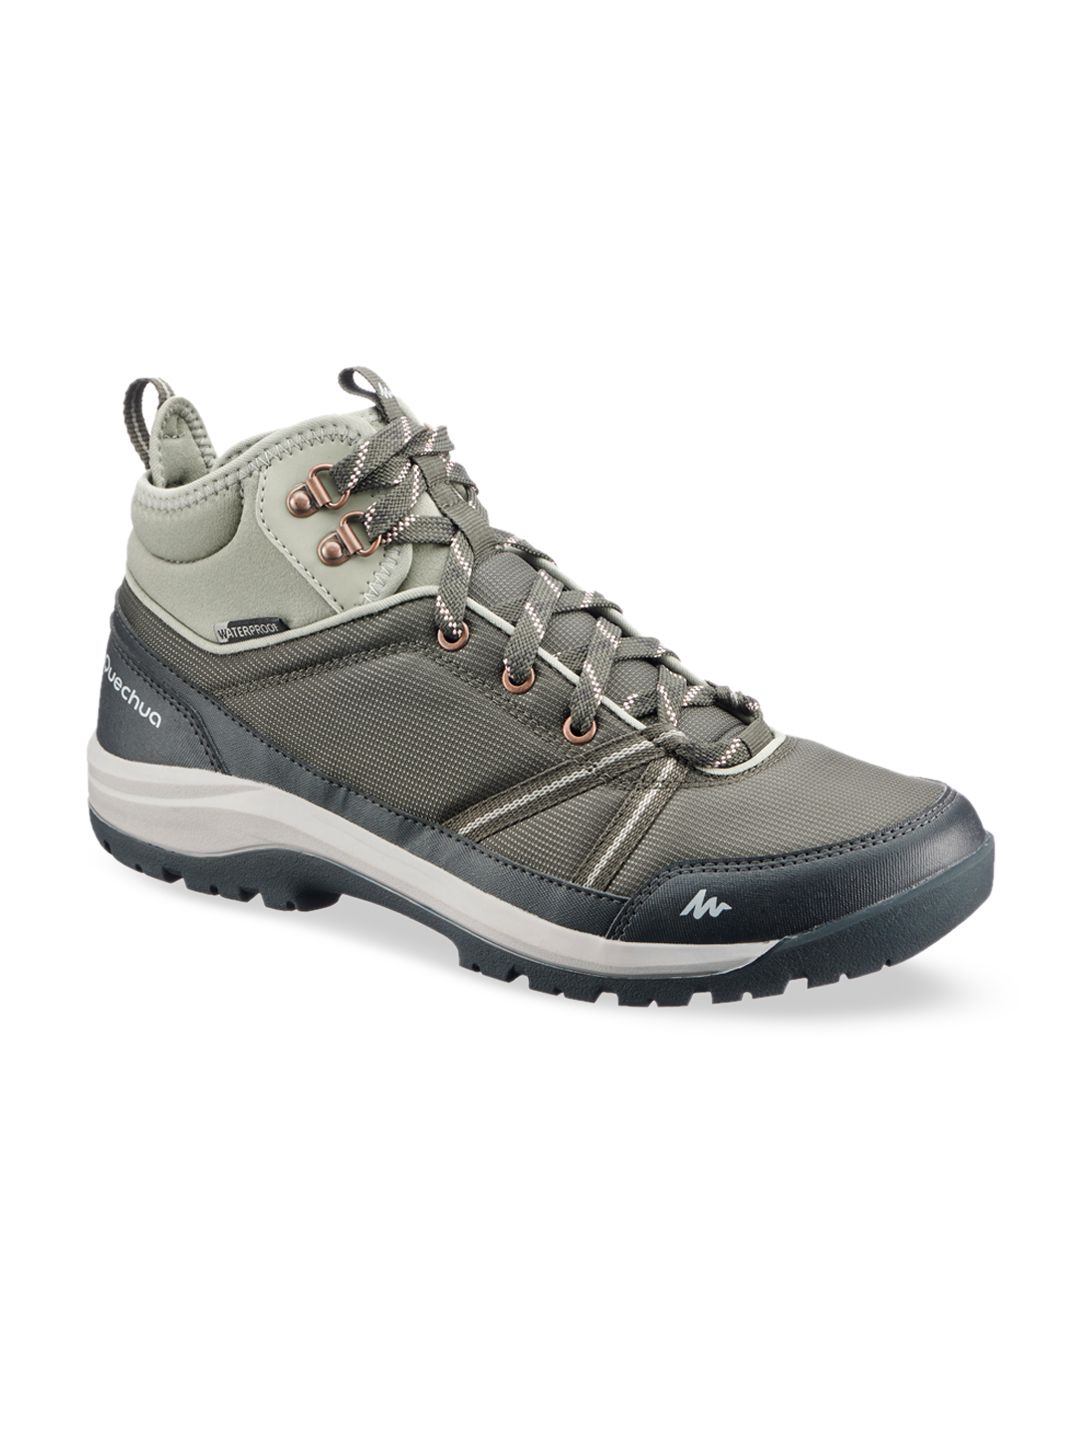 Quechua By Decathlon Women Green Waterproof Hiking Shoes Price in India